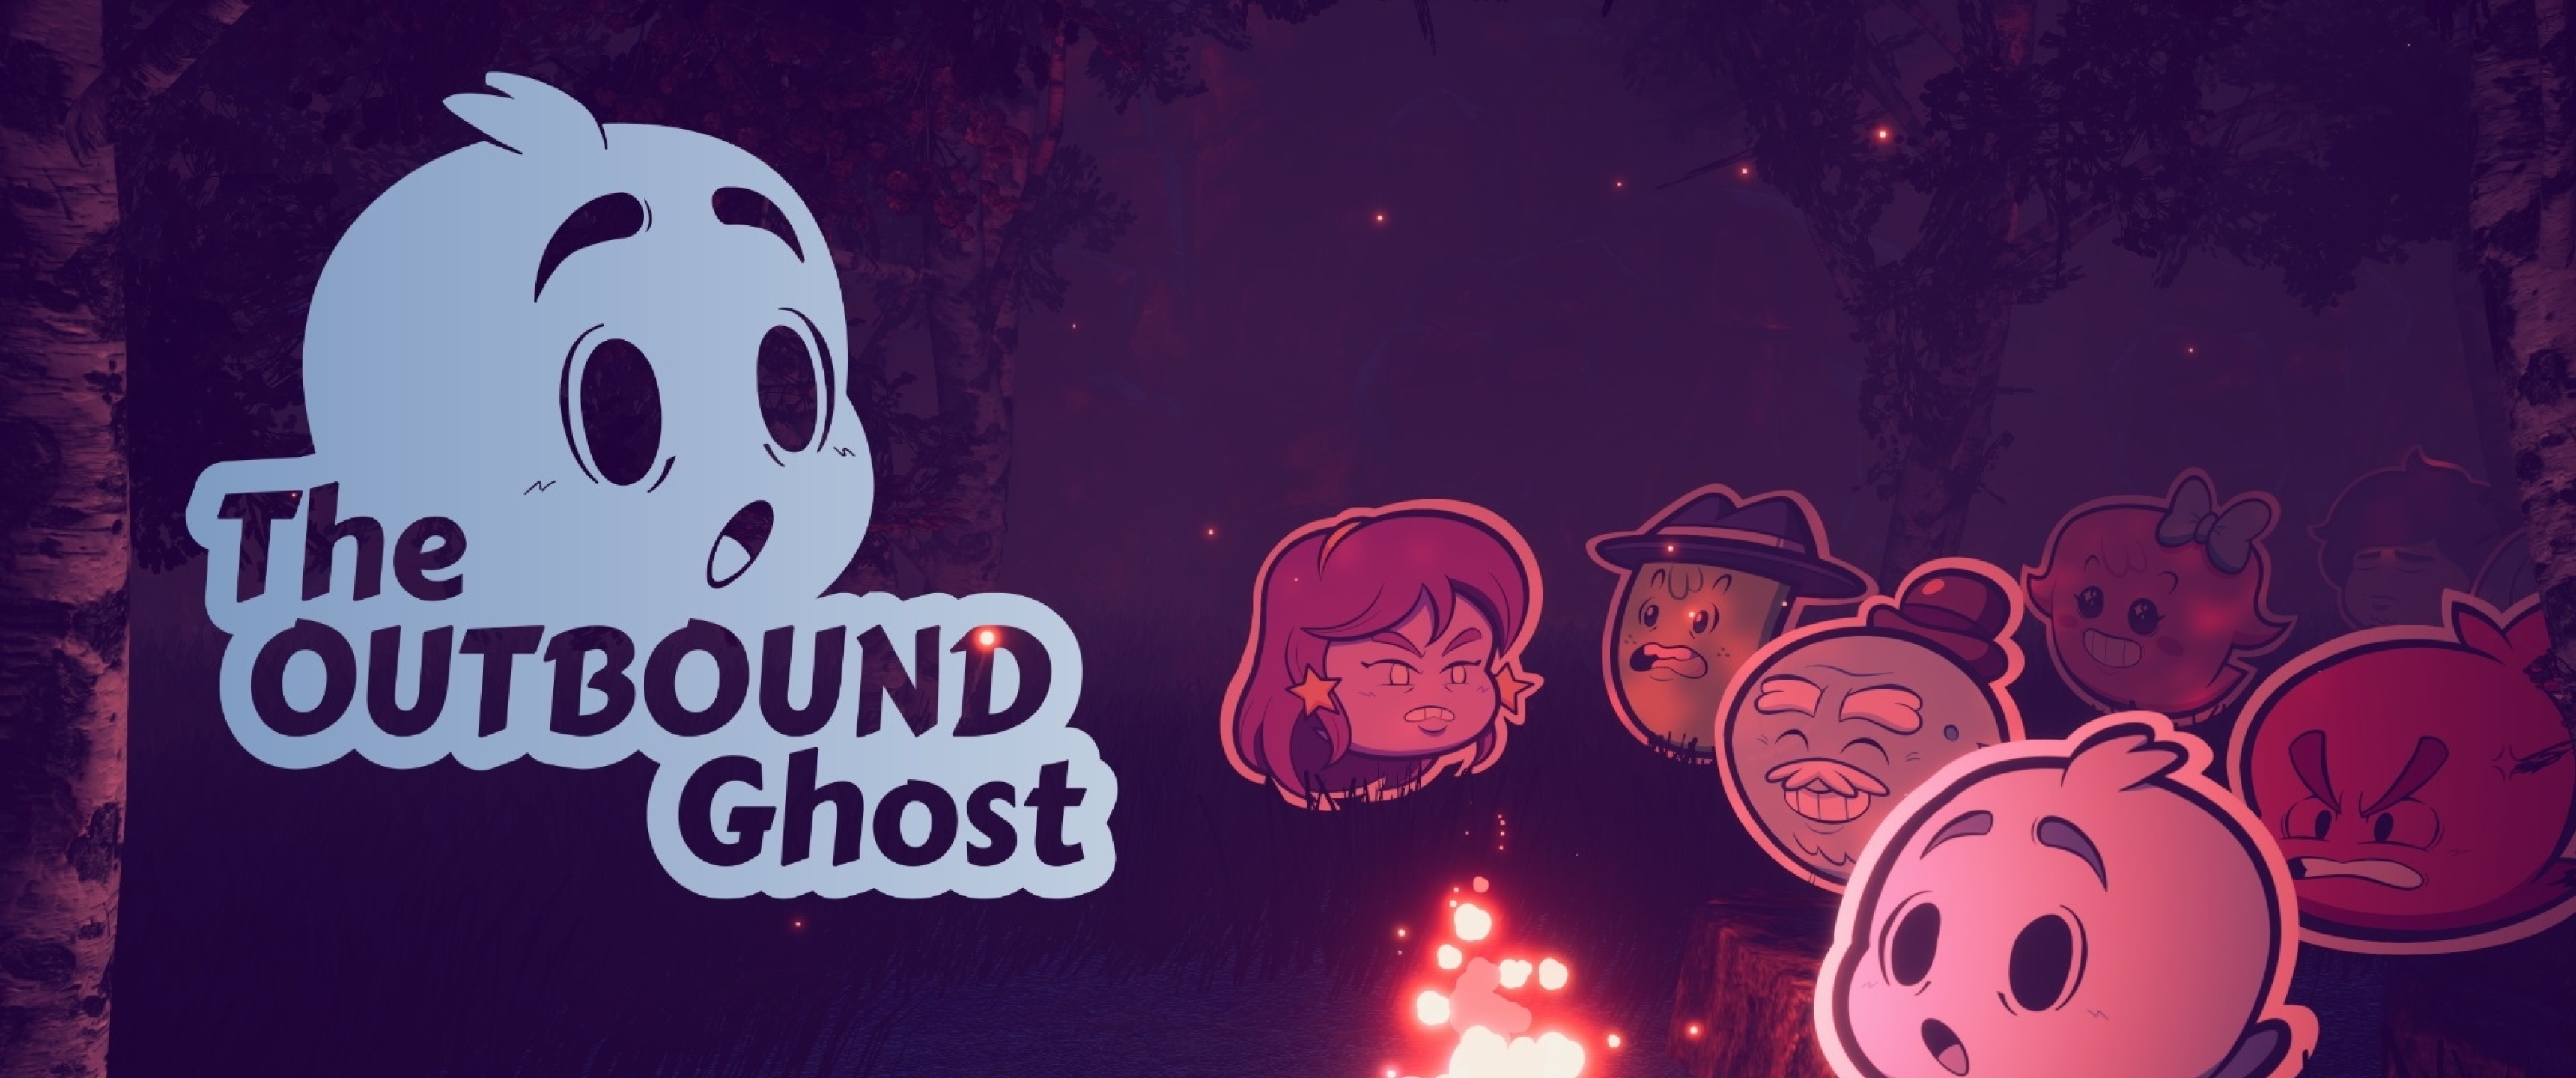 The Outbound Ghost for windows download free